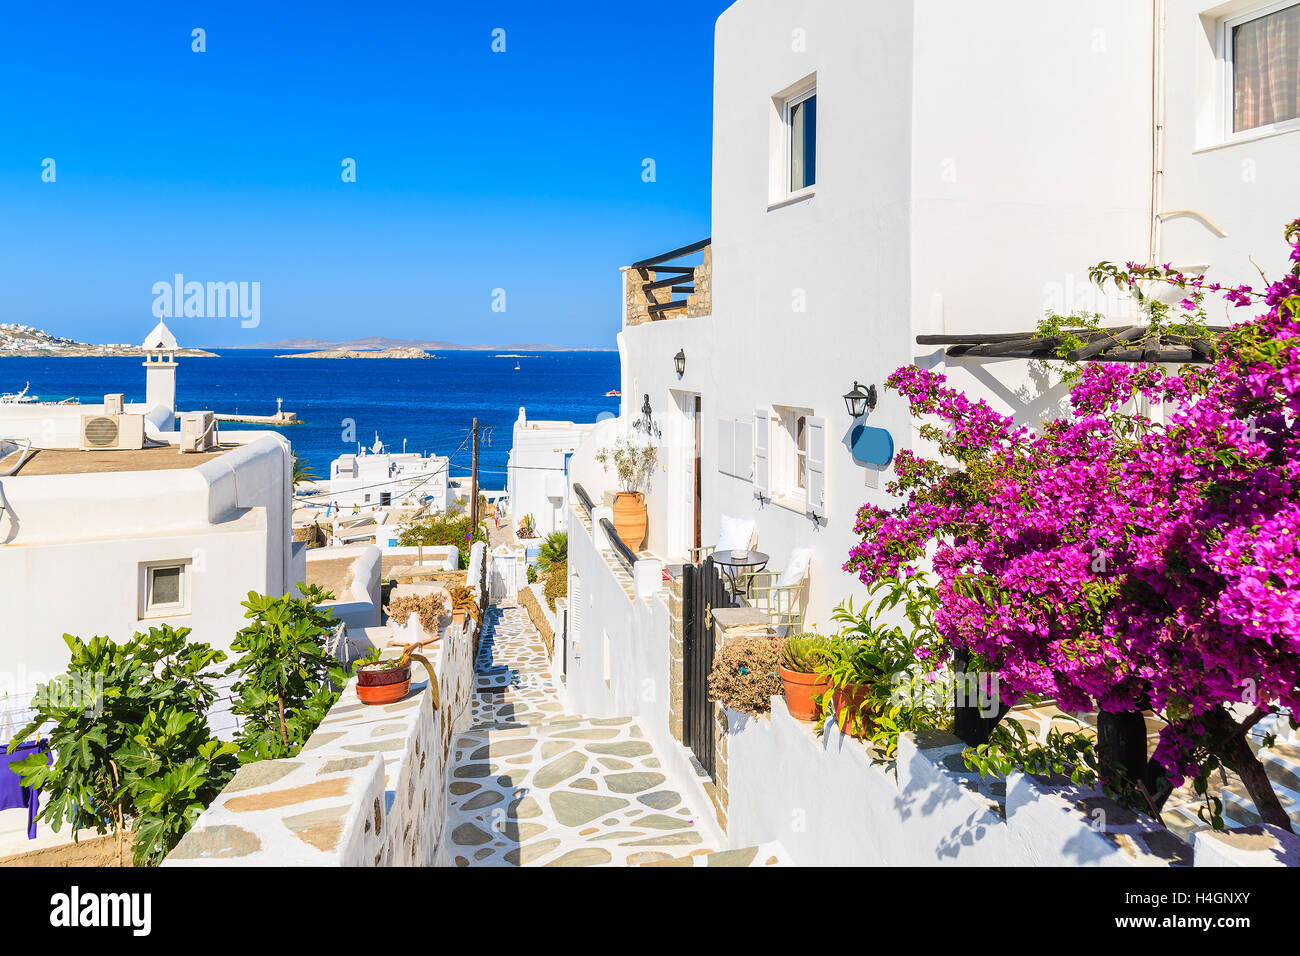 A view of whitewashed street with flowers in beautiful Mykonos town, Cyclades islands, Greece Stock Photo